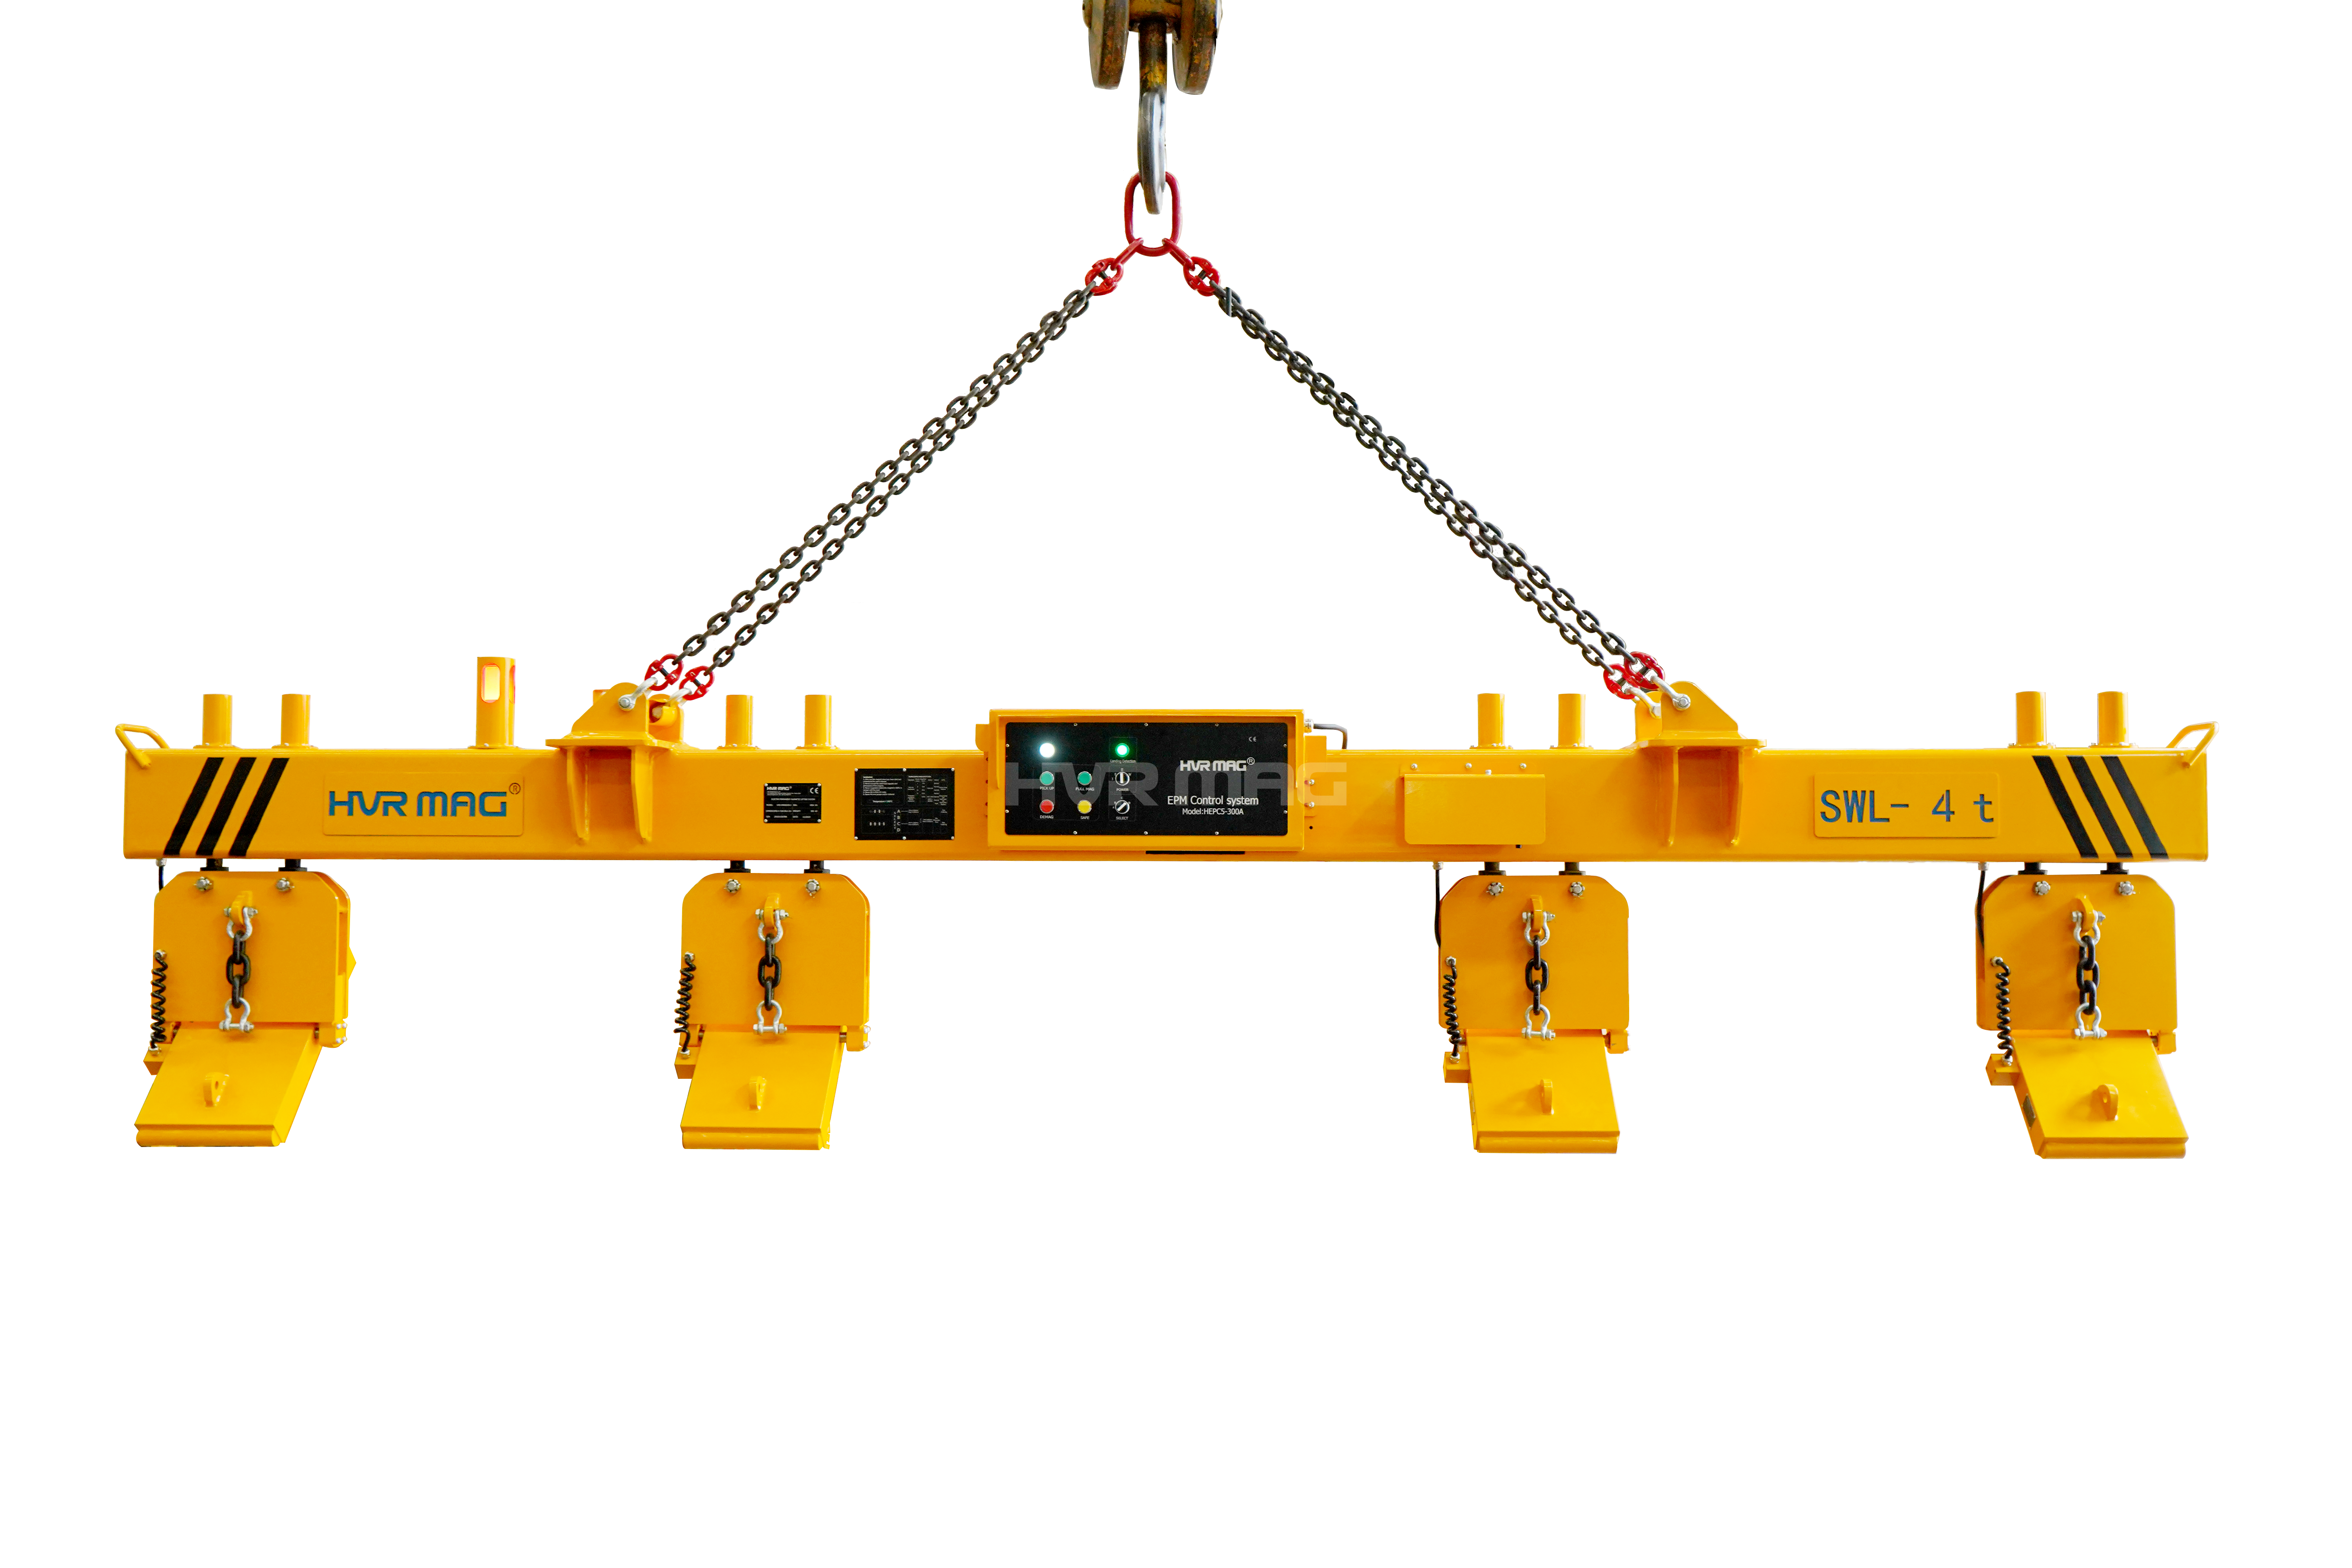 Are You Looking For A Vertical Plate Electro-permanent Magnetic Lifter?